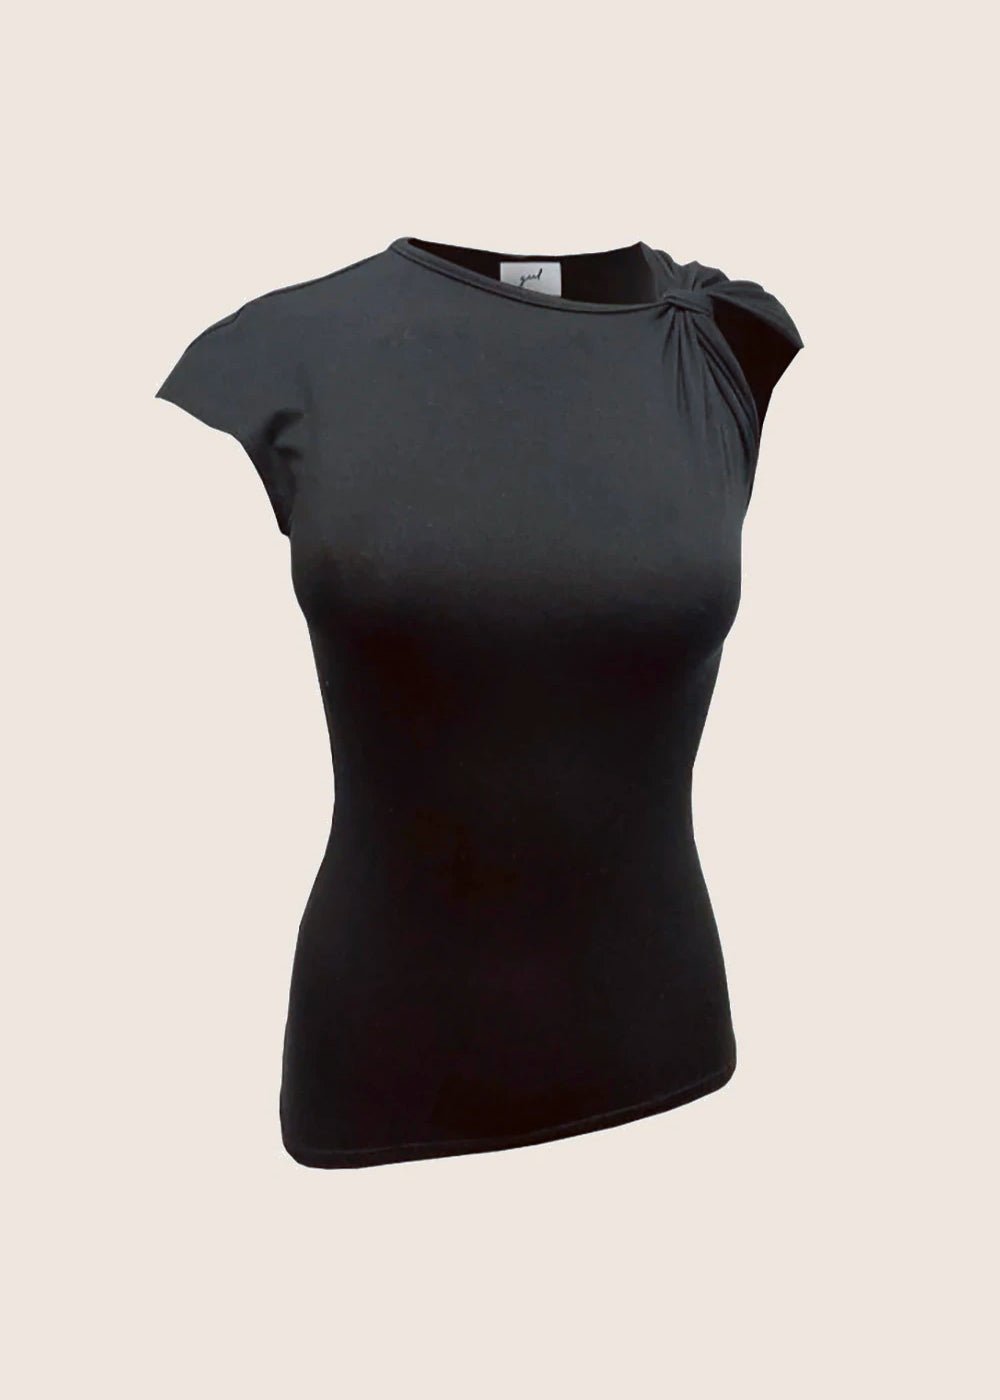 Geel Black Miro Top - New Classics Studios Sustainable Ethical Fashion Canada